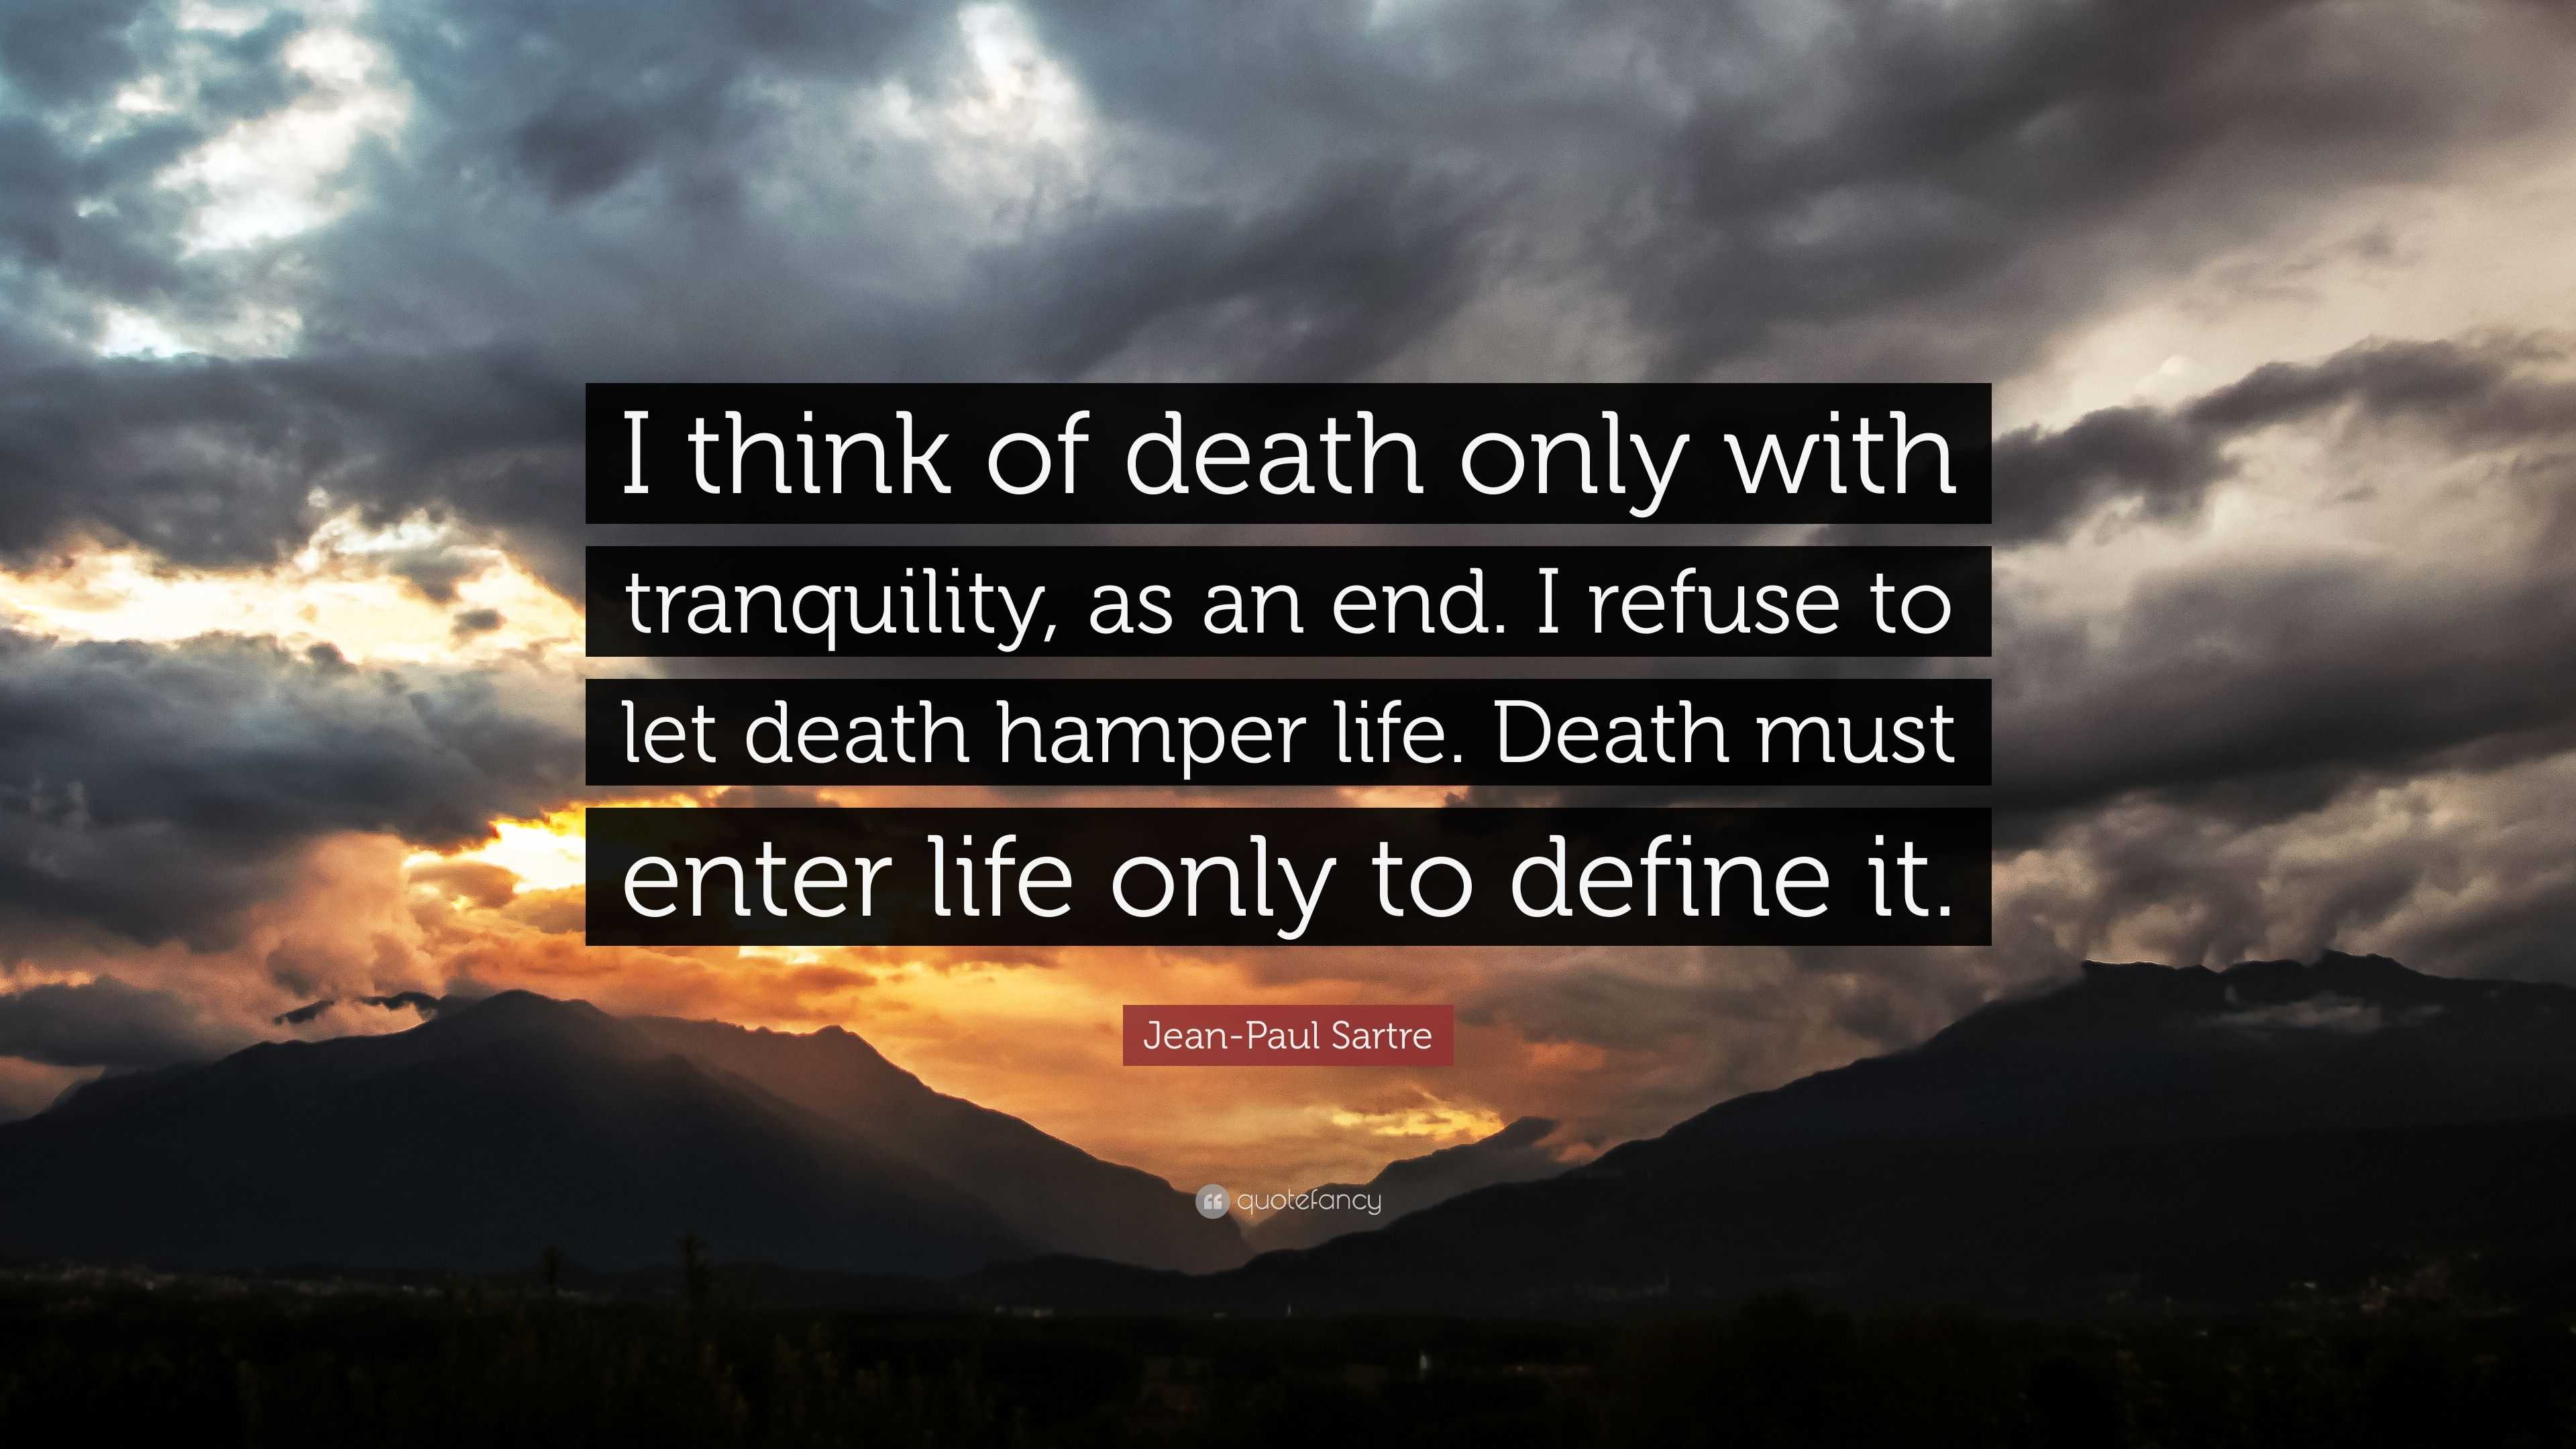 Jean-Paul Sartre Quote: “I think of death only with tranquility, as an ...